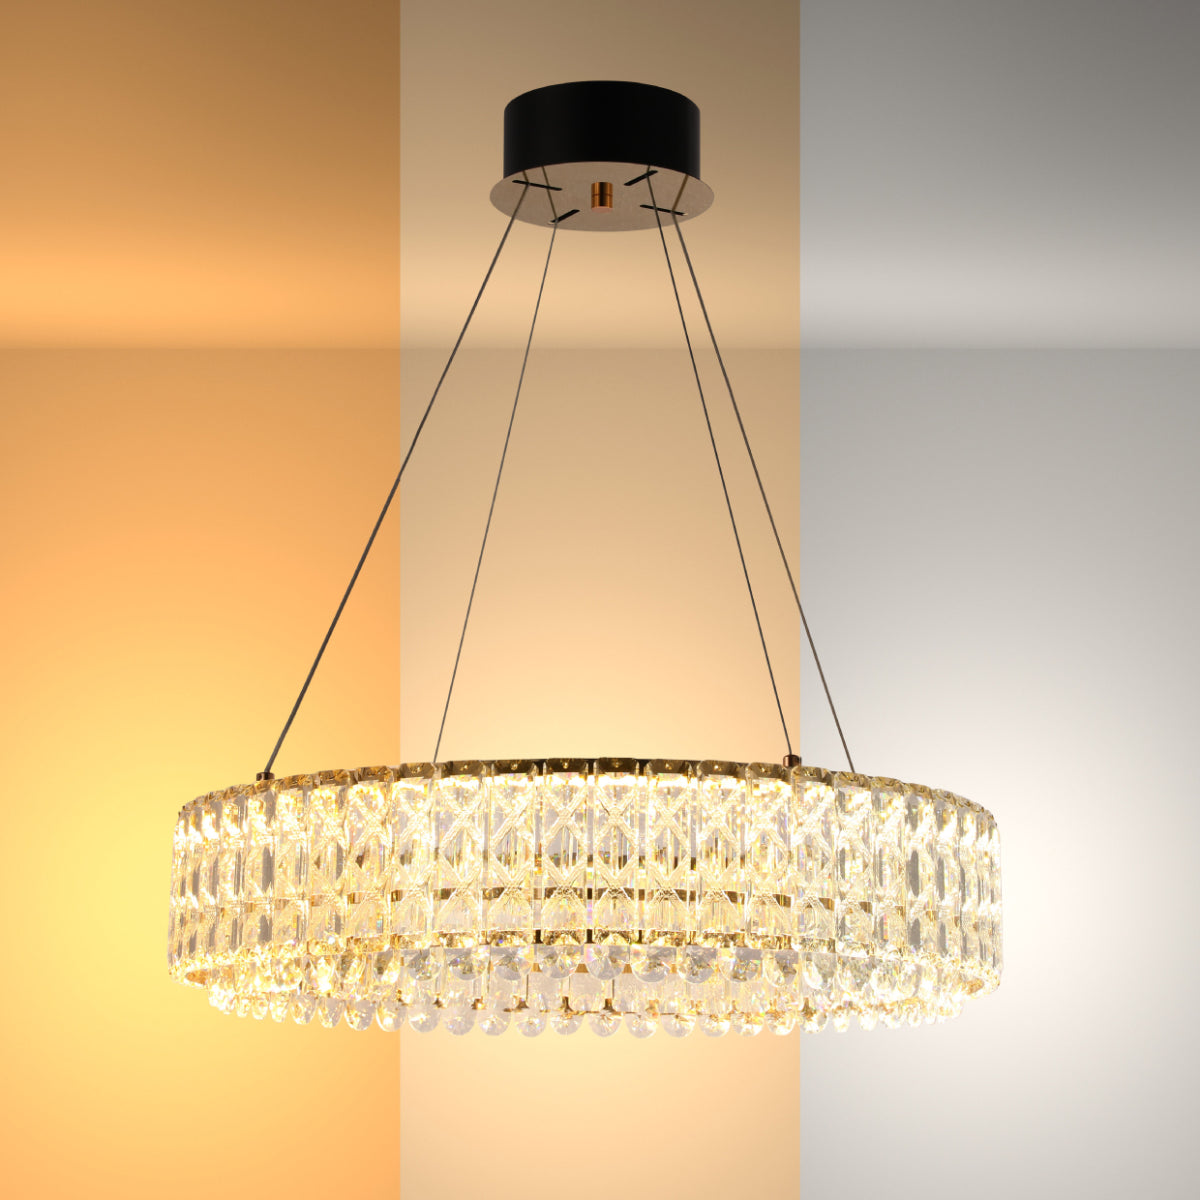 Main image of Crystal Gold Pendant Chandelier Light with Remote Control 159-18216